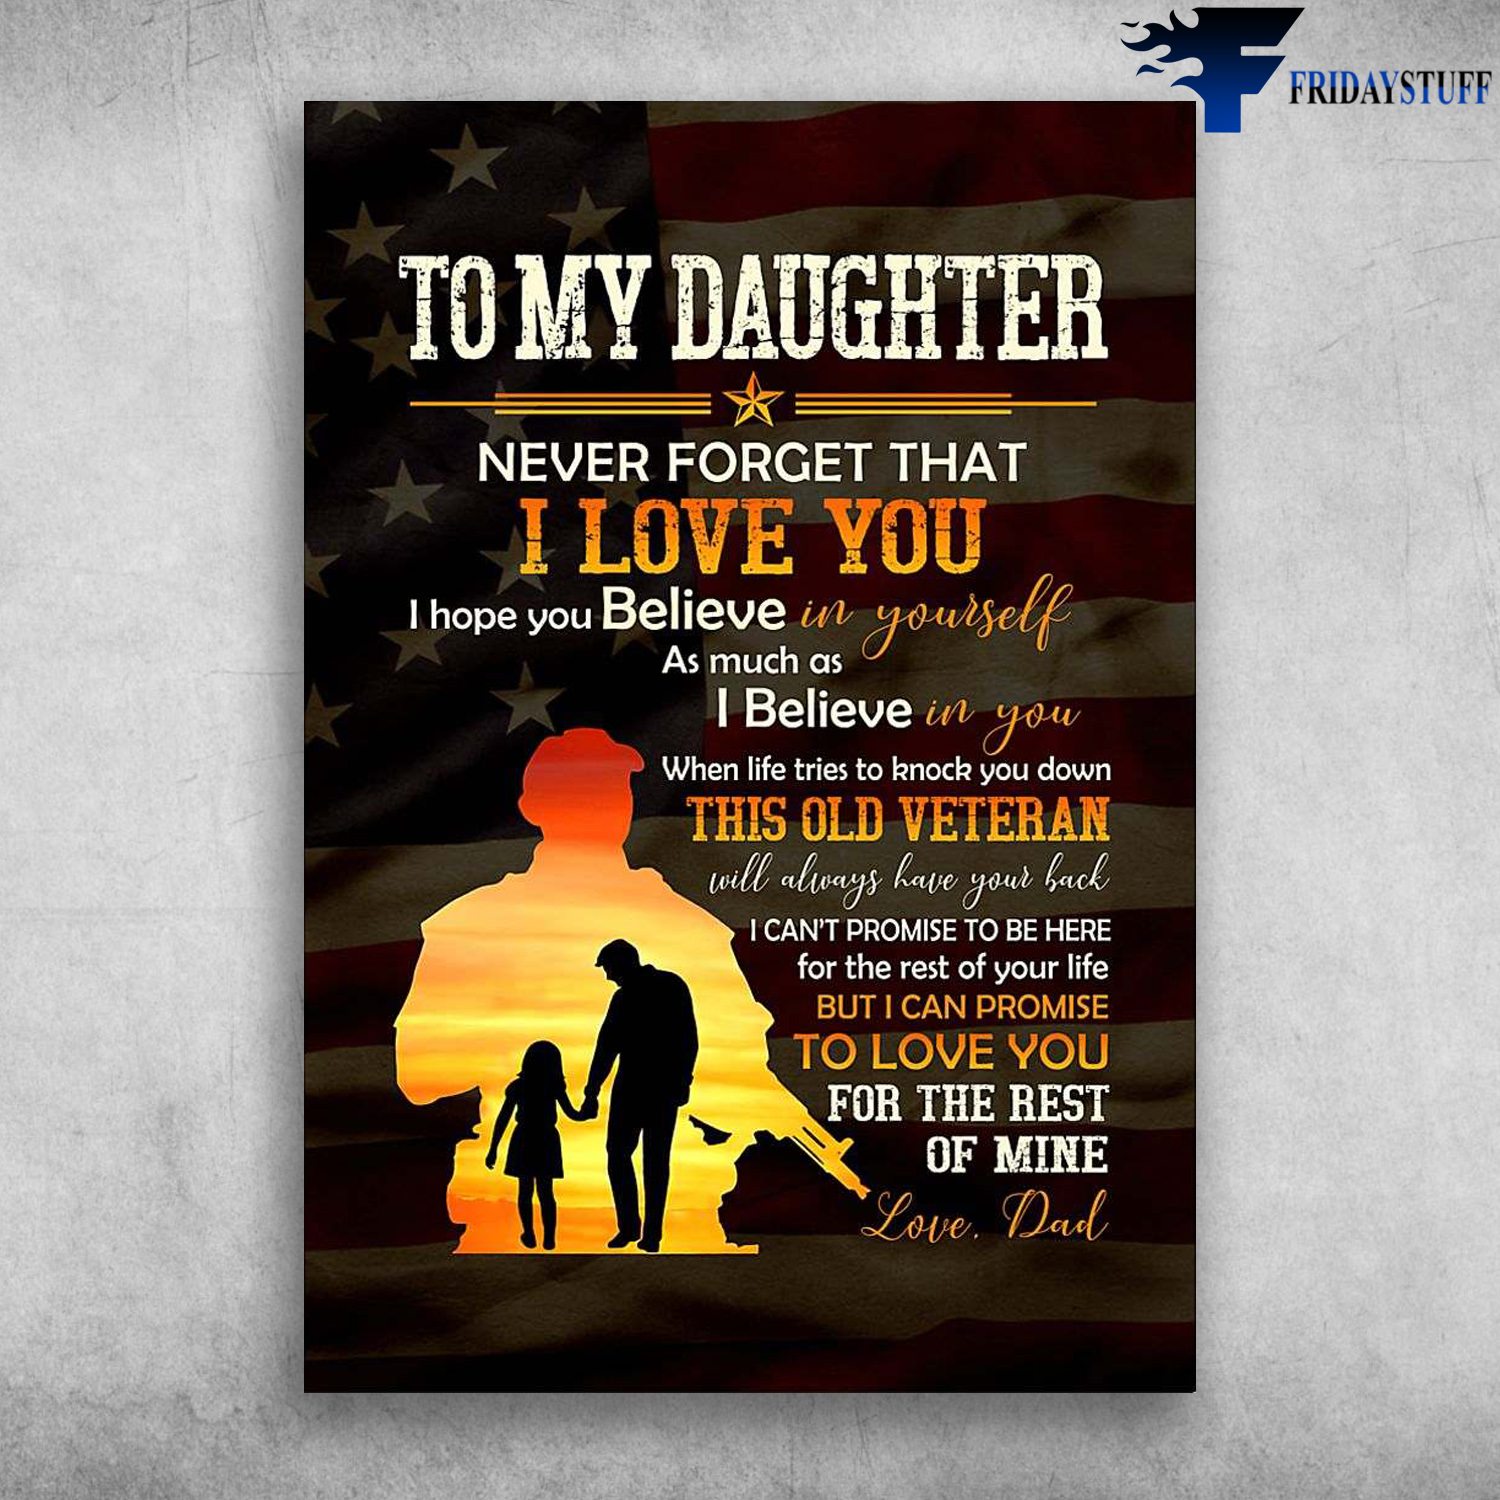 Dad And Daughter, American Soldier -To My Daughter, Never Forget, That I Love You, I Hope You Believe In Yourself, As Much As I Believe In You, Wherever Your Journey In Life May Take You, I Pray You Will Always Be Safe, Enjoy The Ride And Never Forget